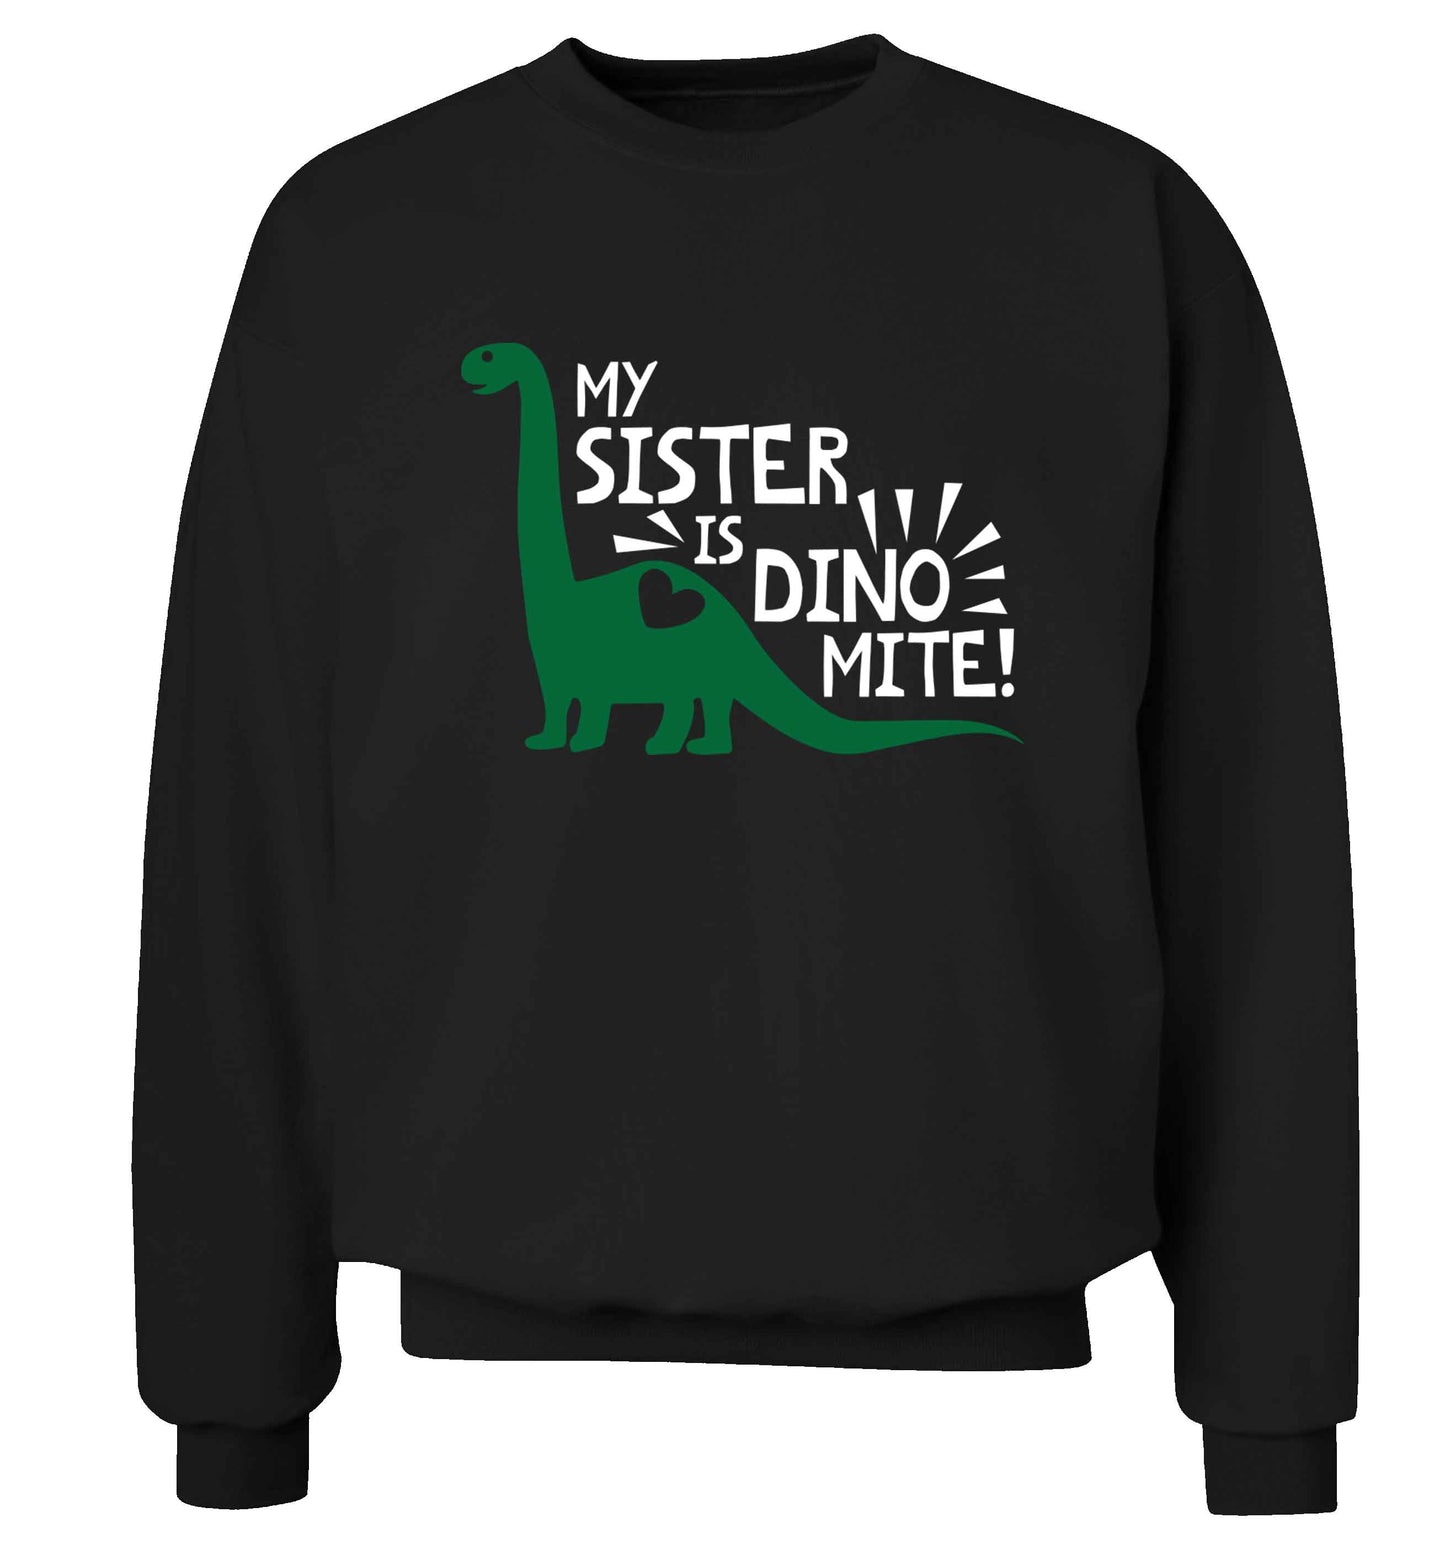 My sister is dinomite! Adult's unisex black Sweater 2XL